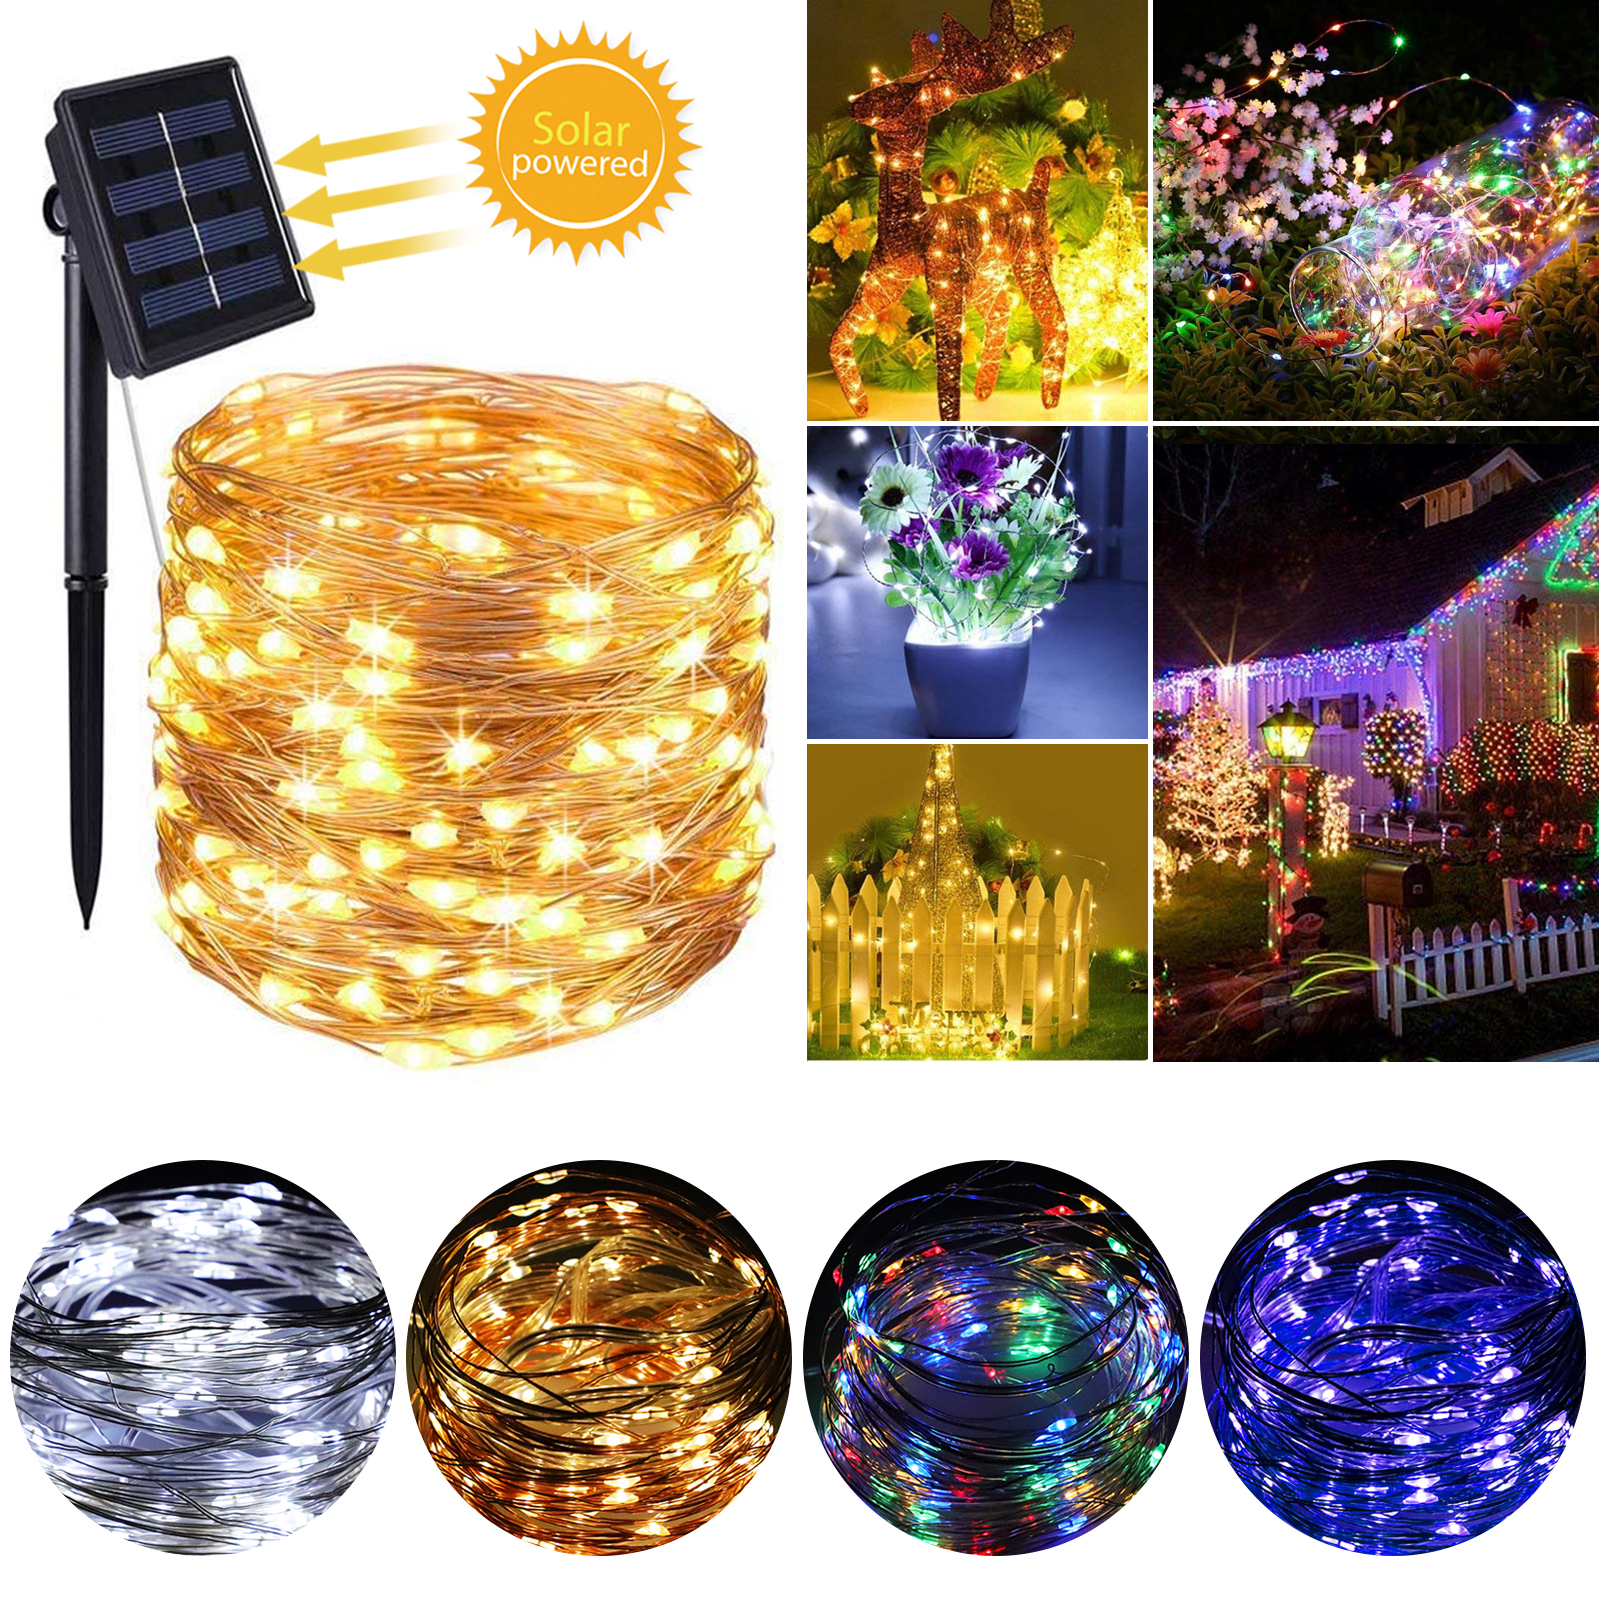 LED Solar String Lights Waterproof Copper Wire Fairy Outdoor Garden String Lamp 